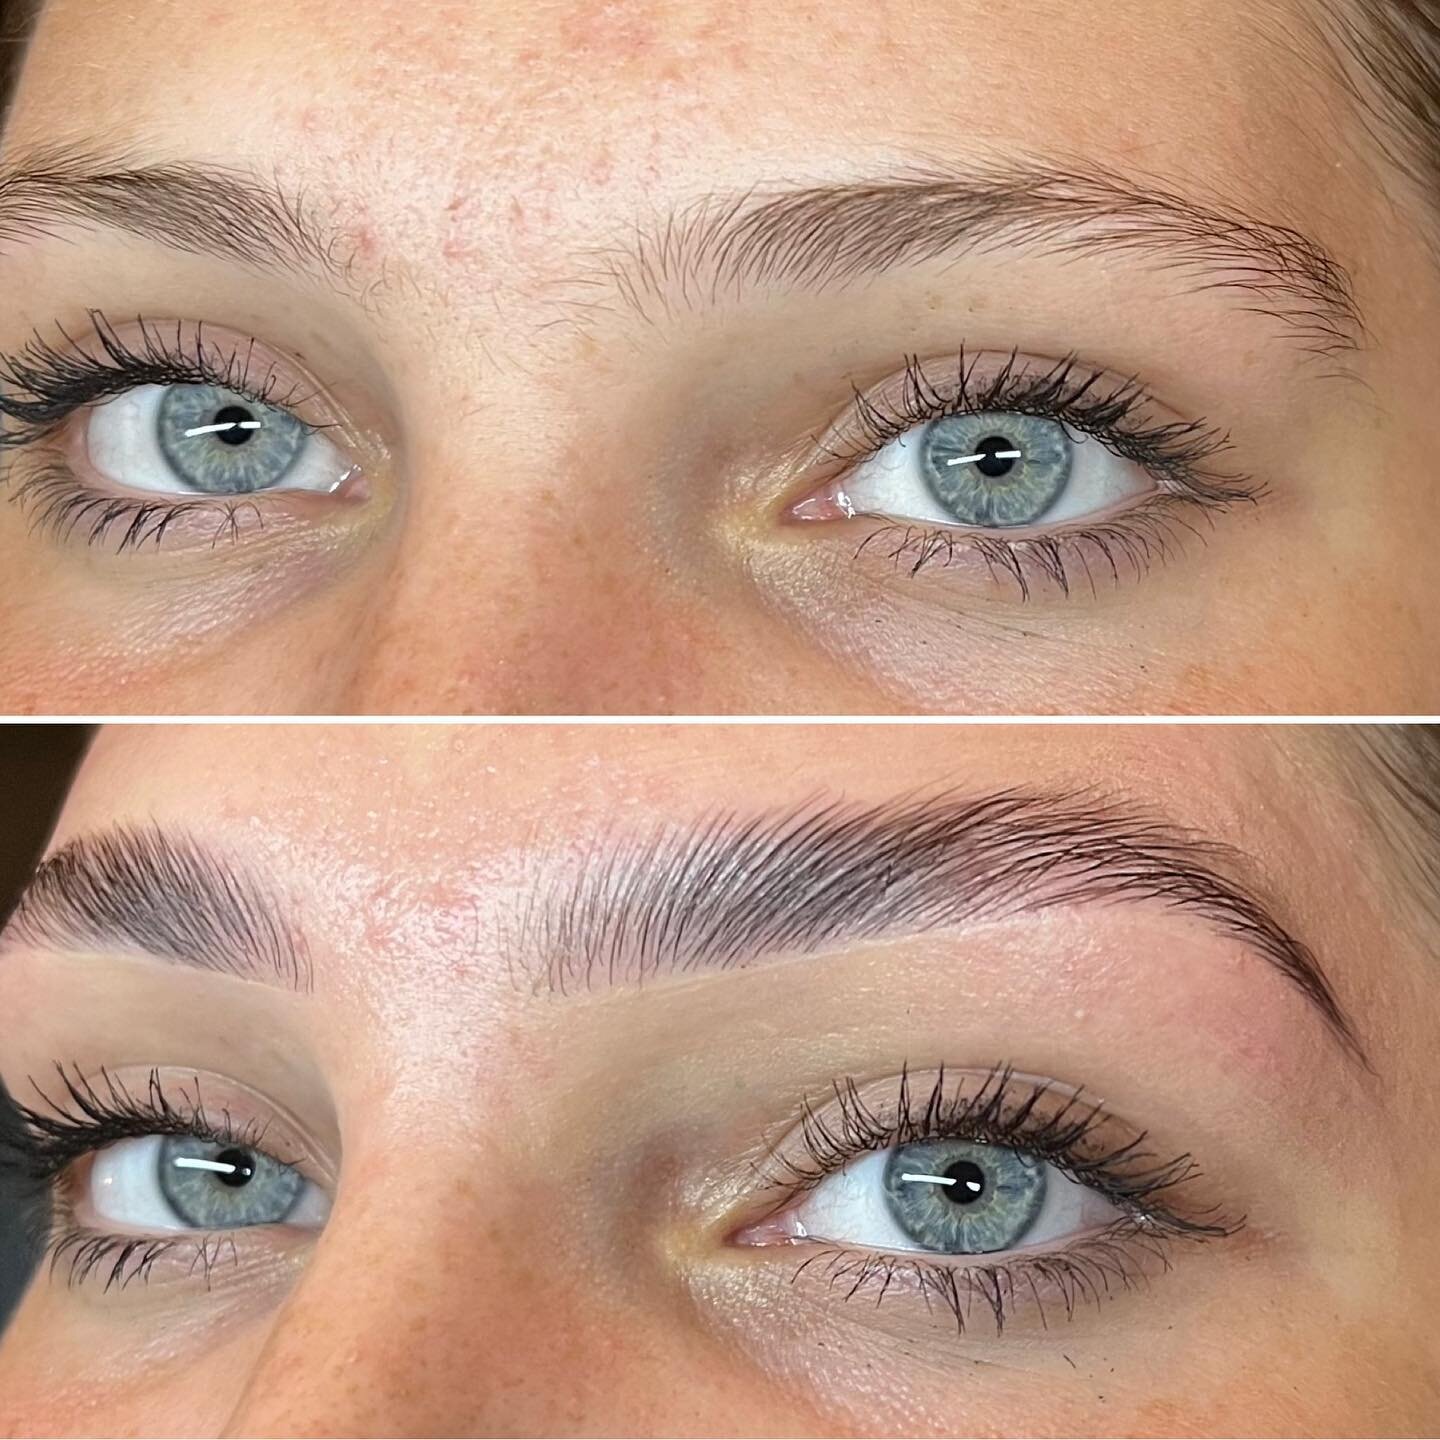 ARCH you gorgeous 
.
Lamination @waxx.xpress  HEAT ME, SPREAD ME, STRIP ME
@thuya_nyc lamination kit
@browcode tint
@browtender BROW BOMB (pre &amp; post wax/ lamination treatment)
 

#Browtender #BaltimoreBrows #BestBrowsinBaltimore #Baltimore #Balt